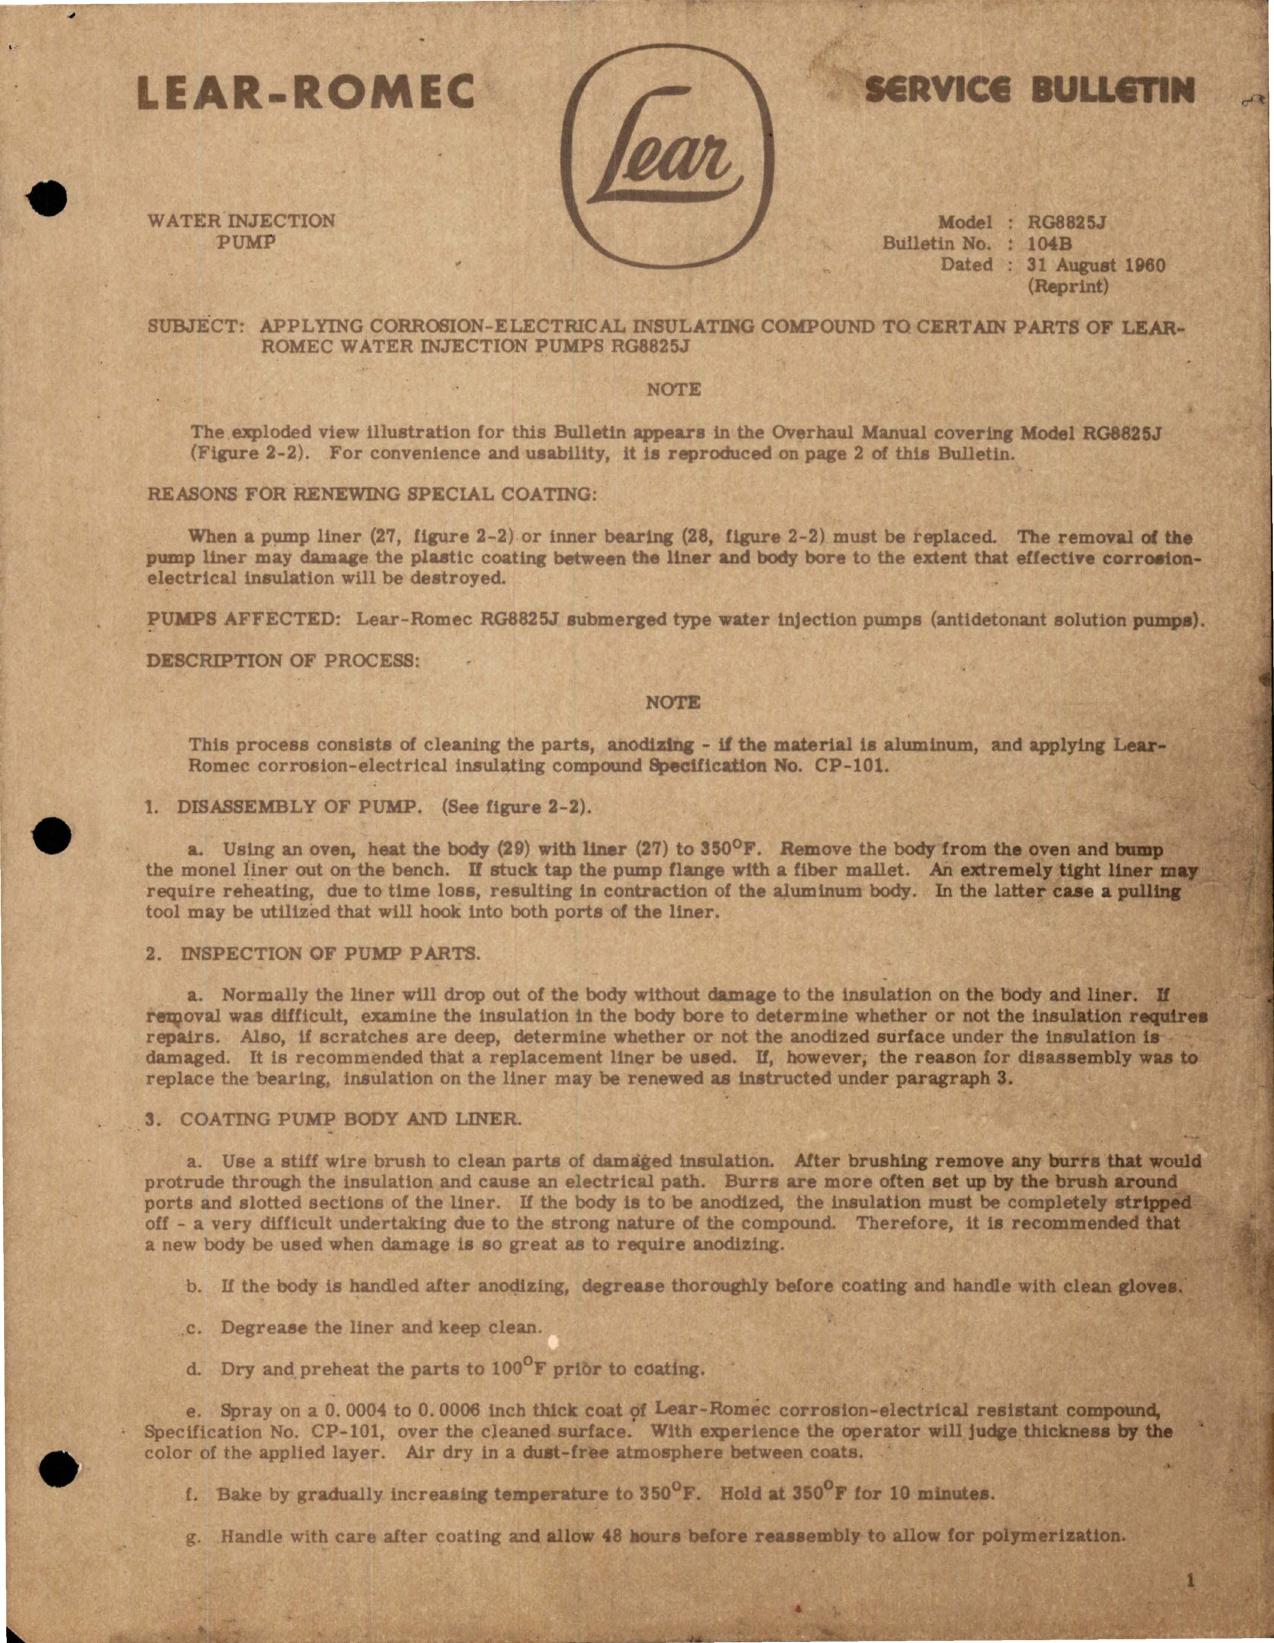 Sample page 1 from AirCorps Library document: Service Bulletin for Applying Corrosion Electrical Insulating Compound to Certain Parts of Water Injection Pumps - RG8825J